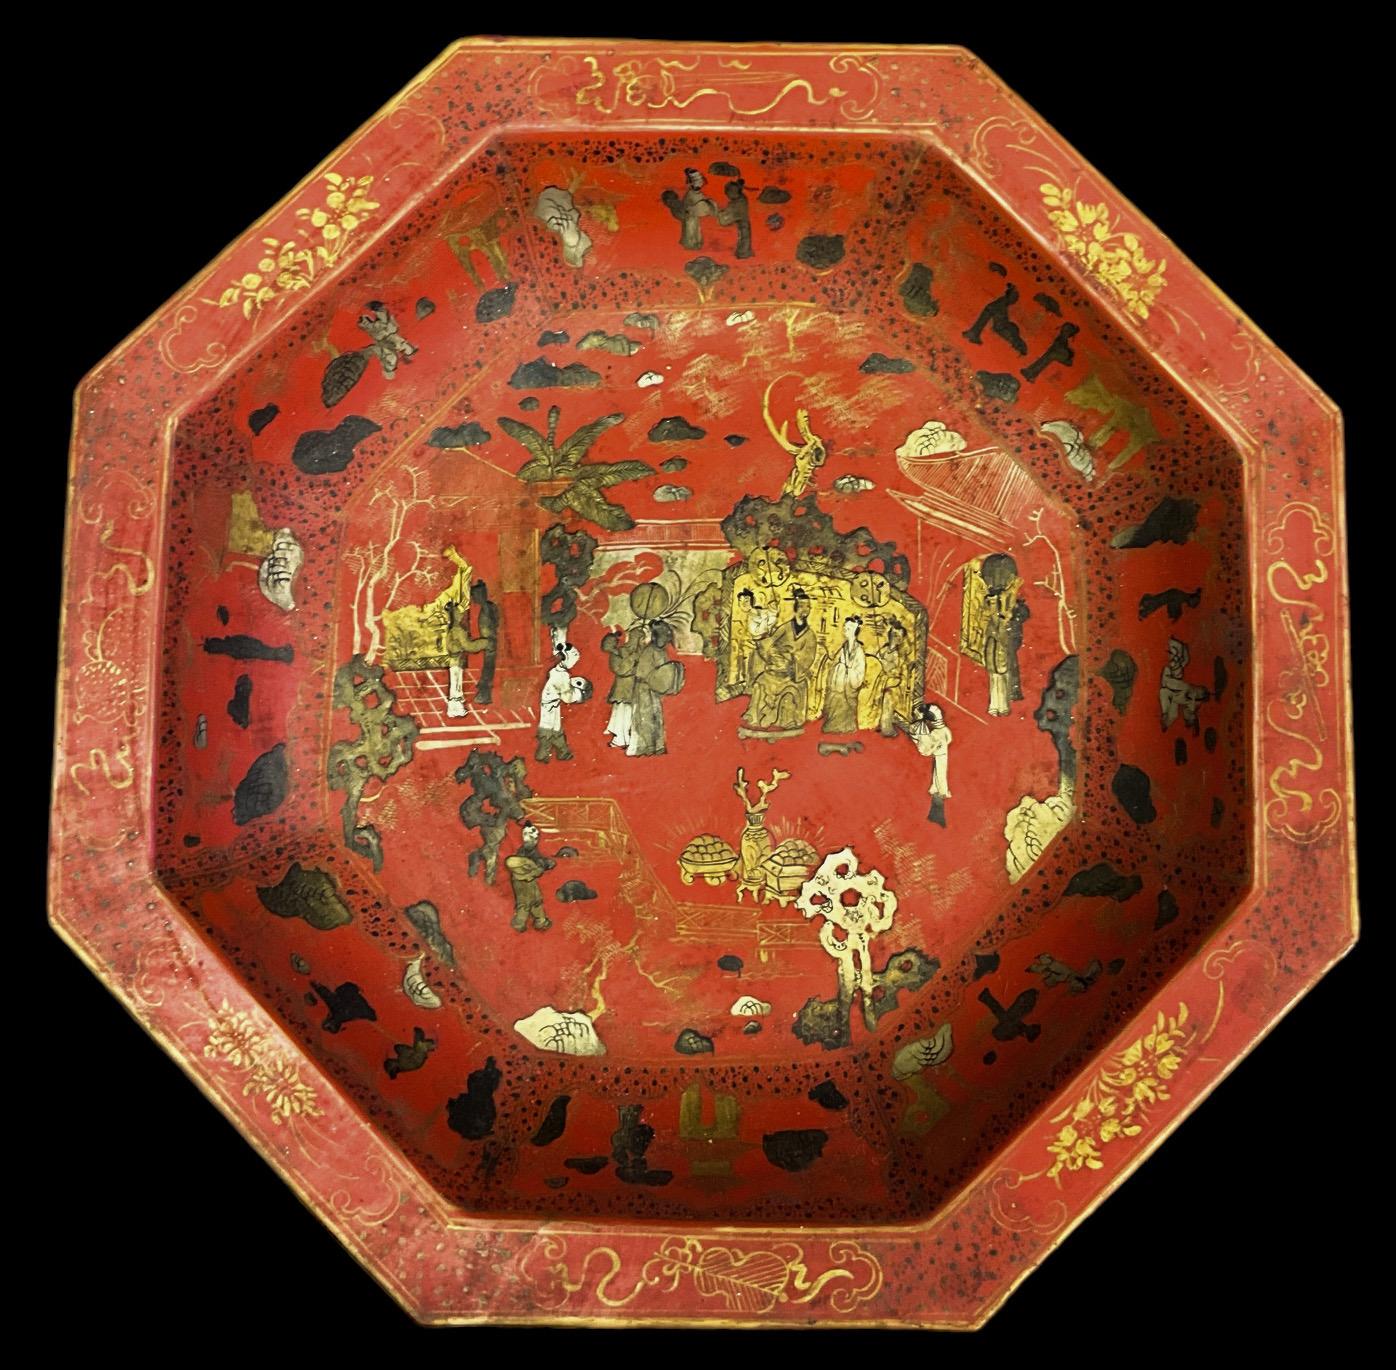 Very decorative! This is a large scale shallow bowl or platter with Chinese Export styling. It is a red with gilt pastoral scenes . It is in very good condition.